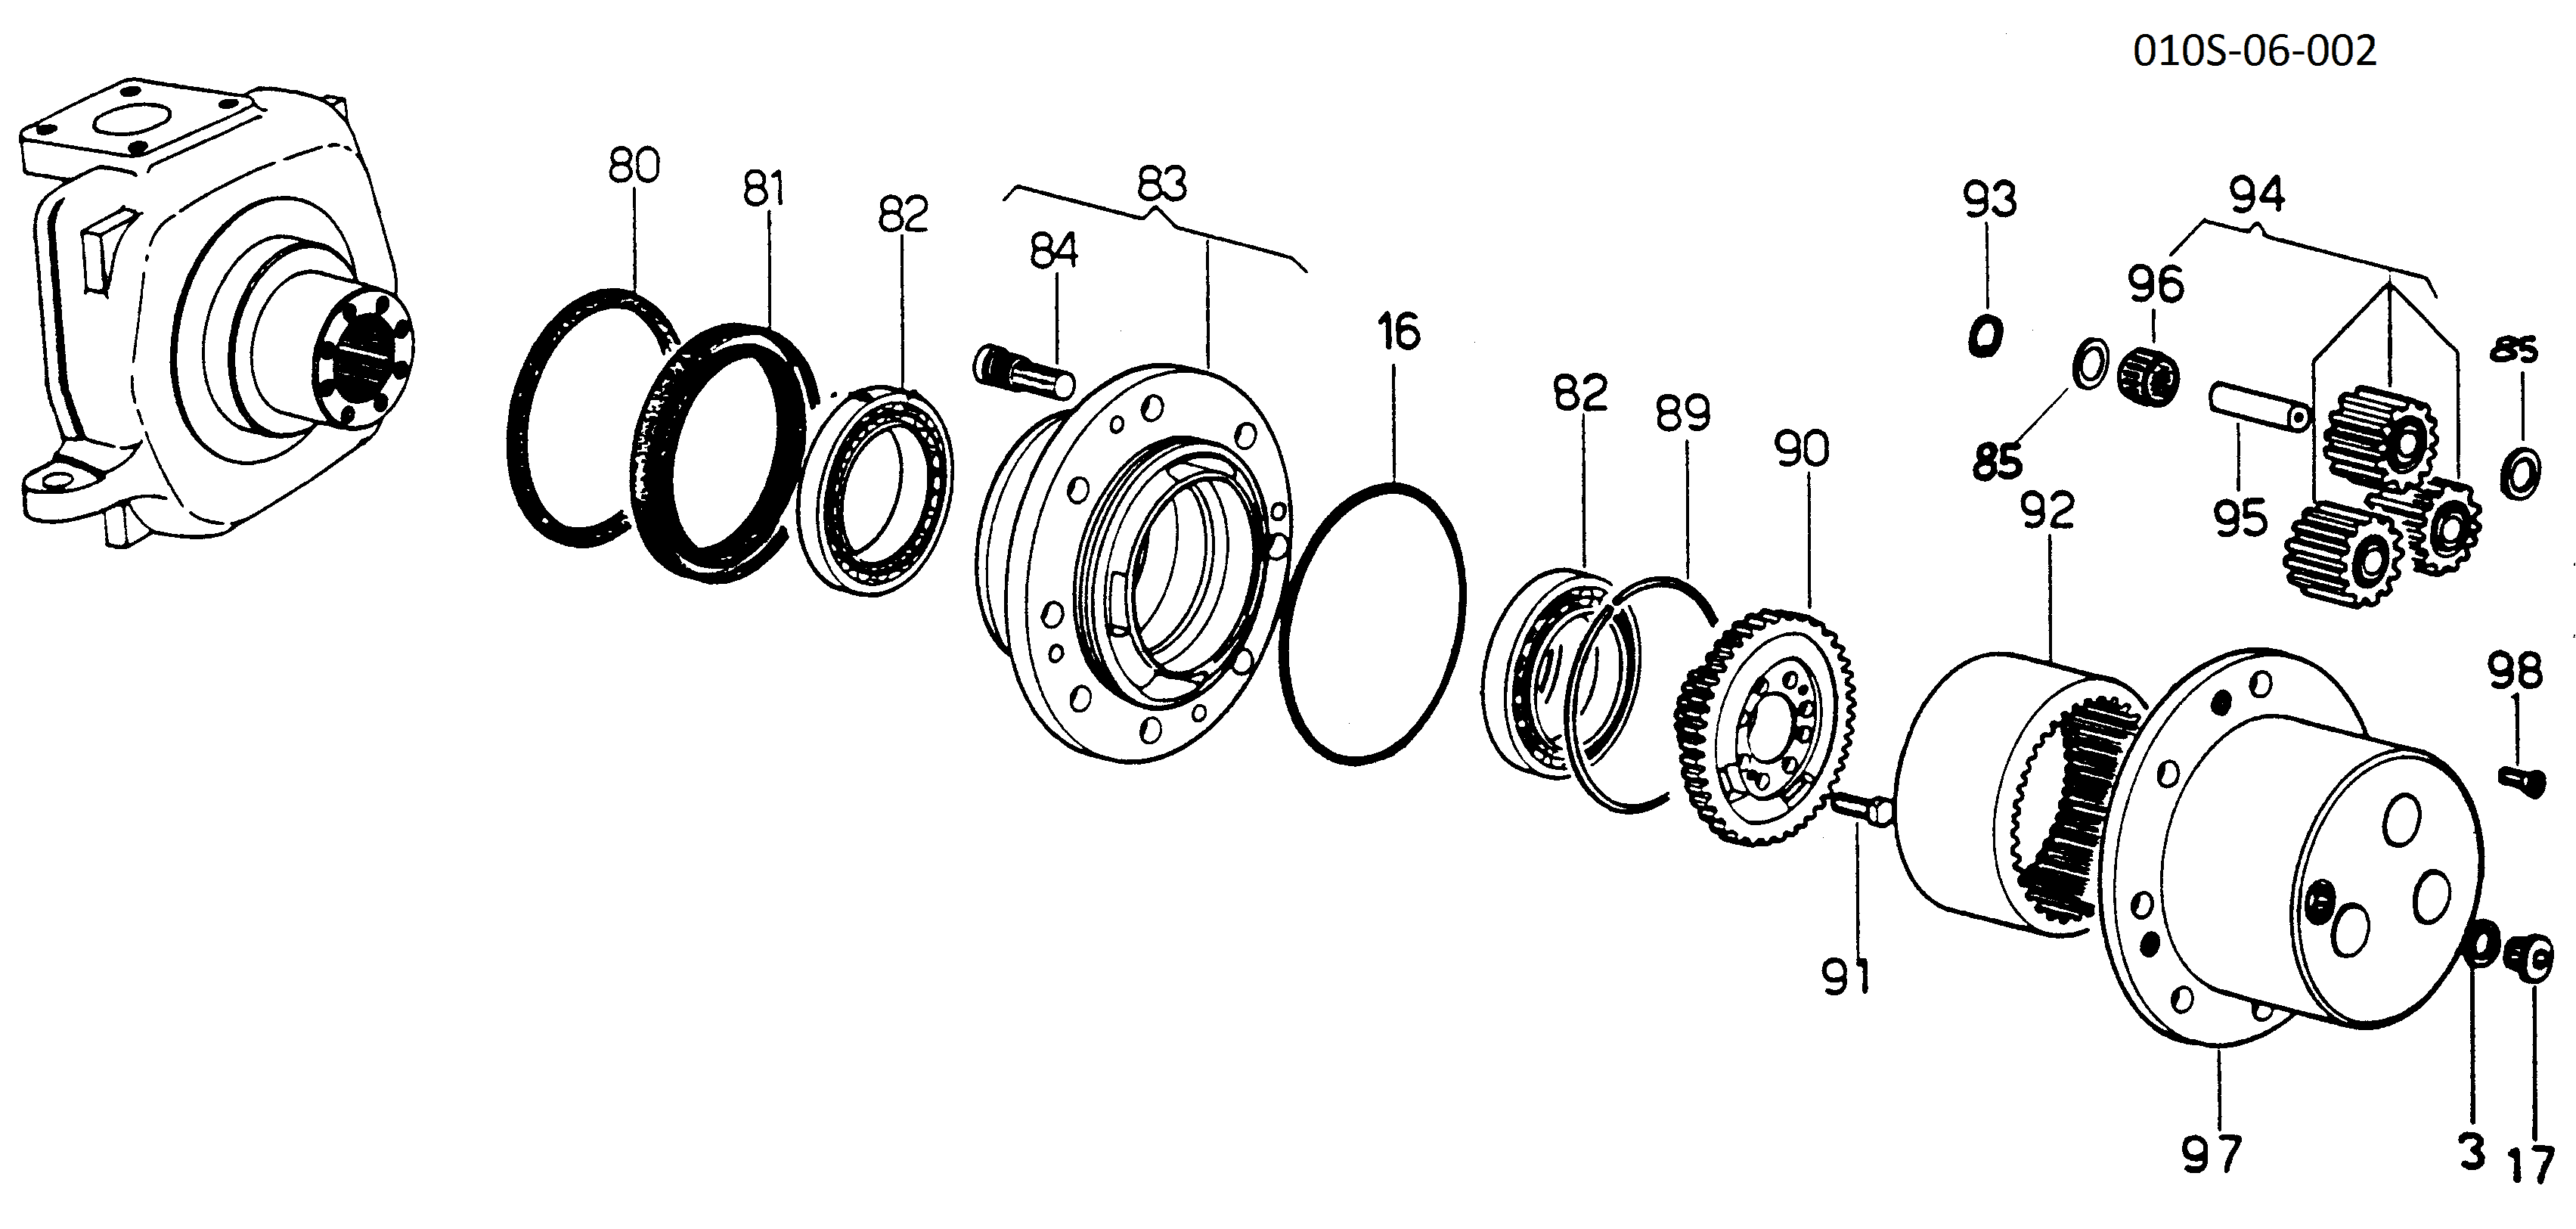 drawing for CNH NEW HOLLAND 1-33-741-017 - WHEEL HUB